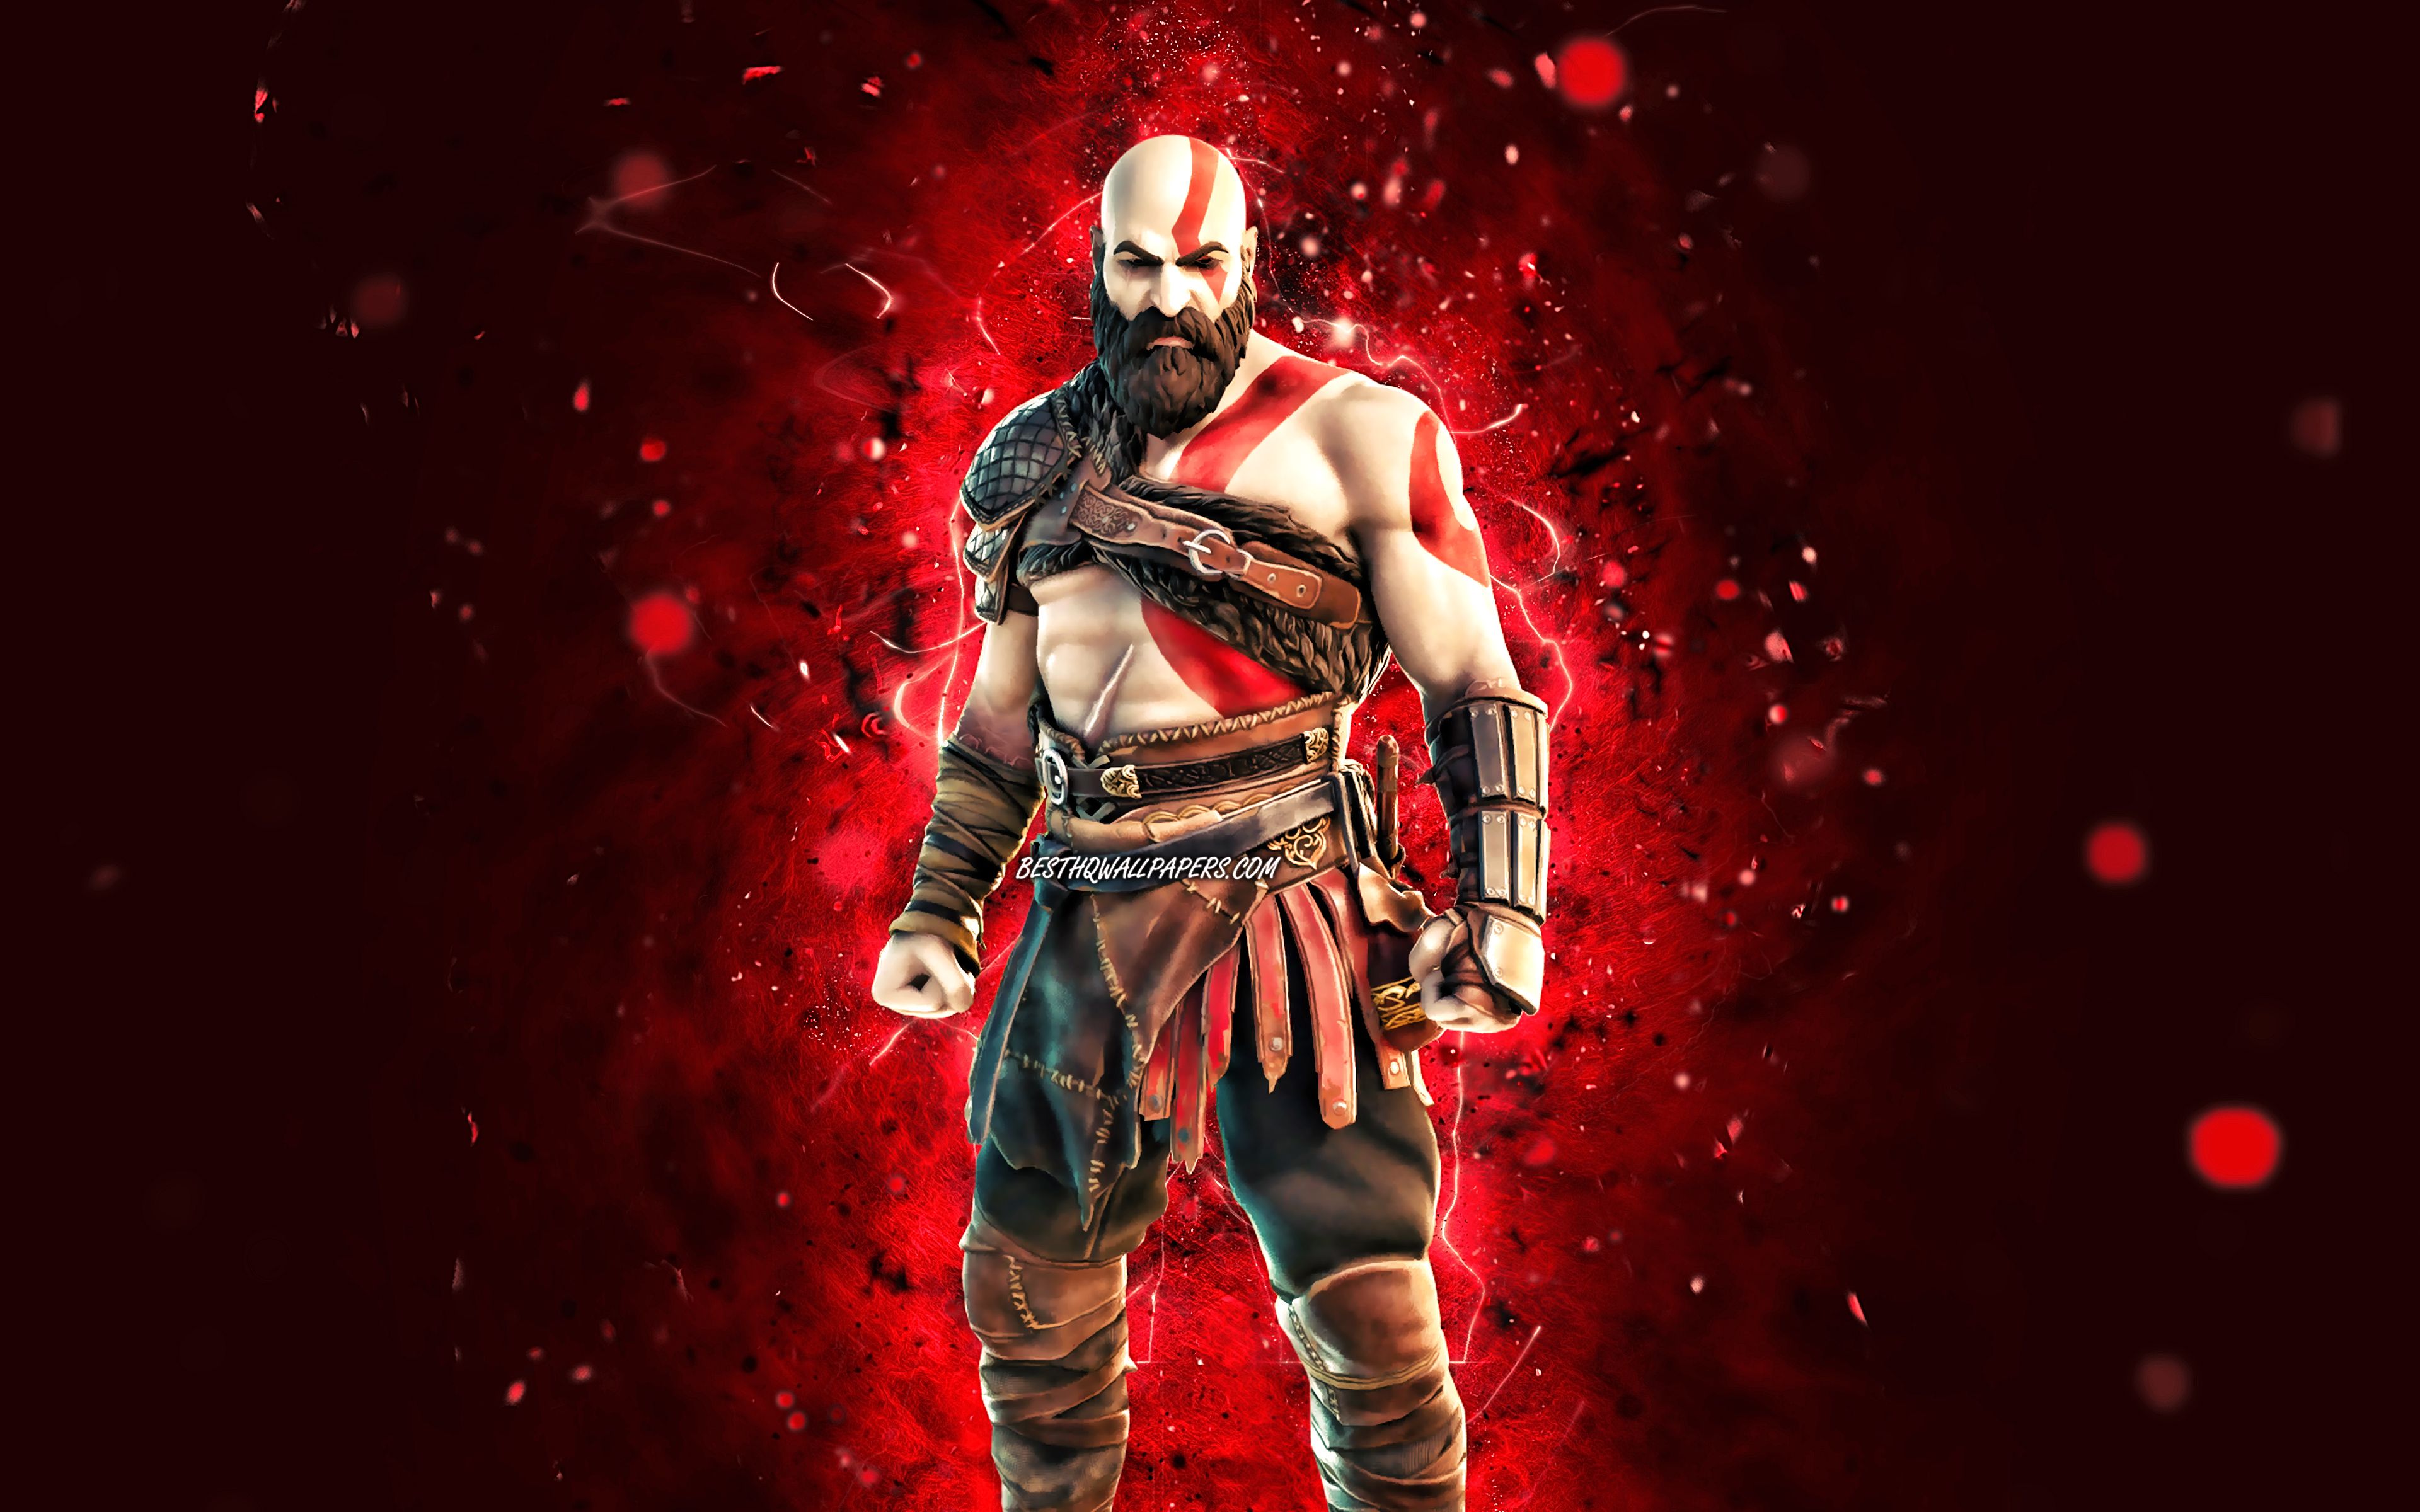 Download wallpaper Kratos, 4k, red neon lights, Fortnite Battle Royale, Fortnite characters, Kratos Skin, Fortnite, Kratos Fortnite for desktop with resolution 3840x2400. High Quality HD picture wallpaper